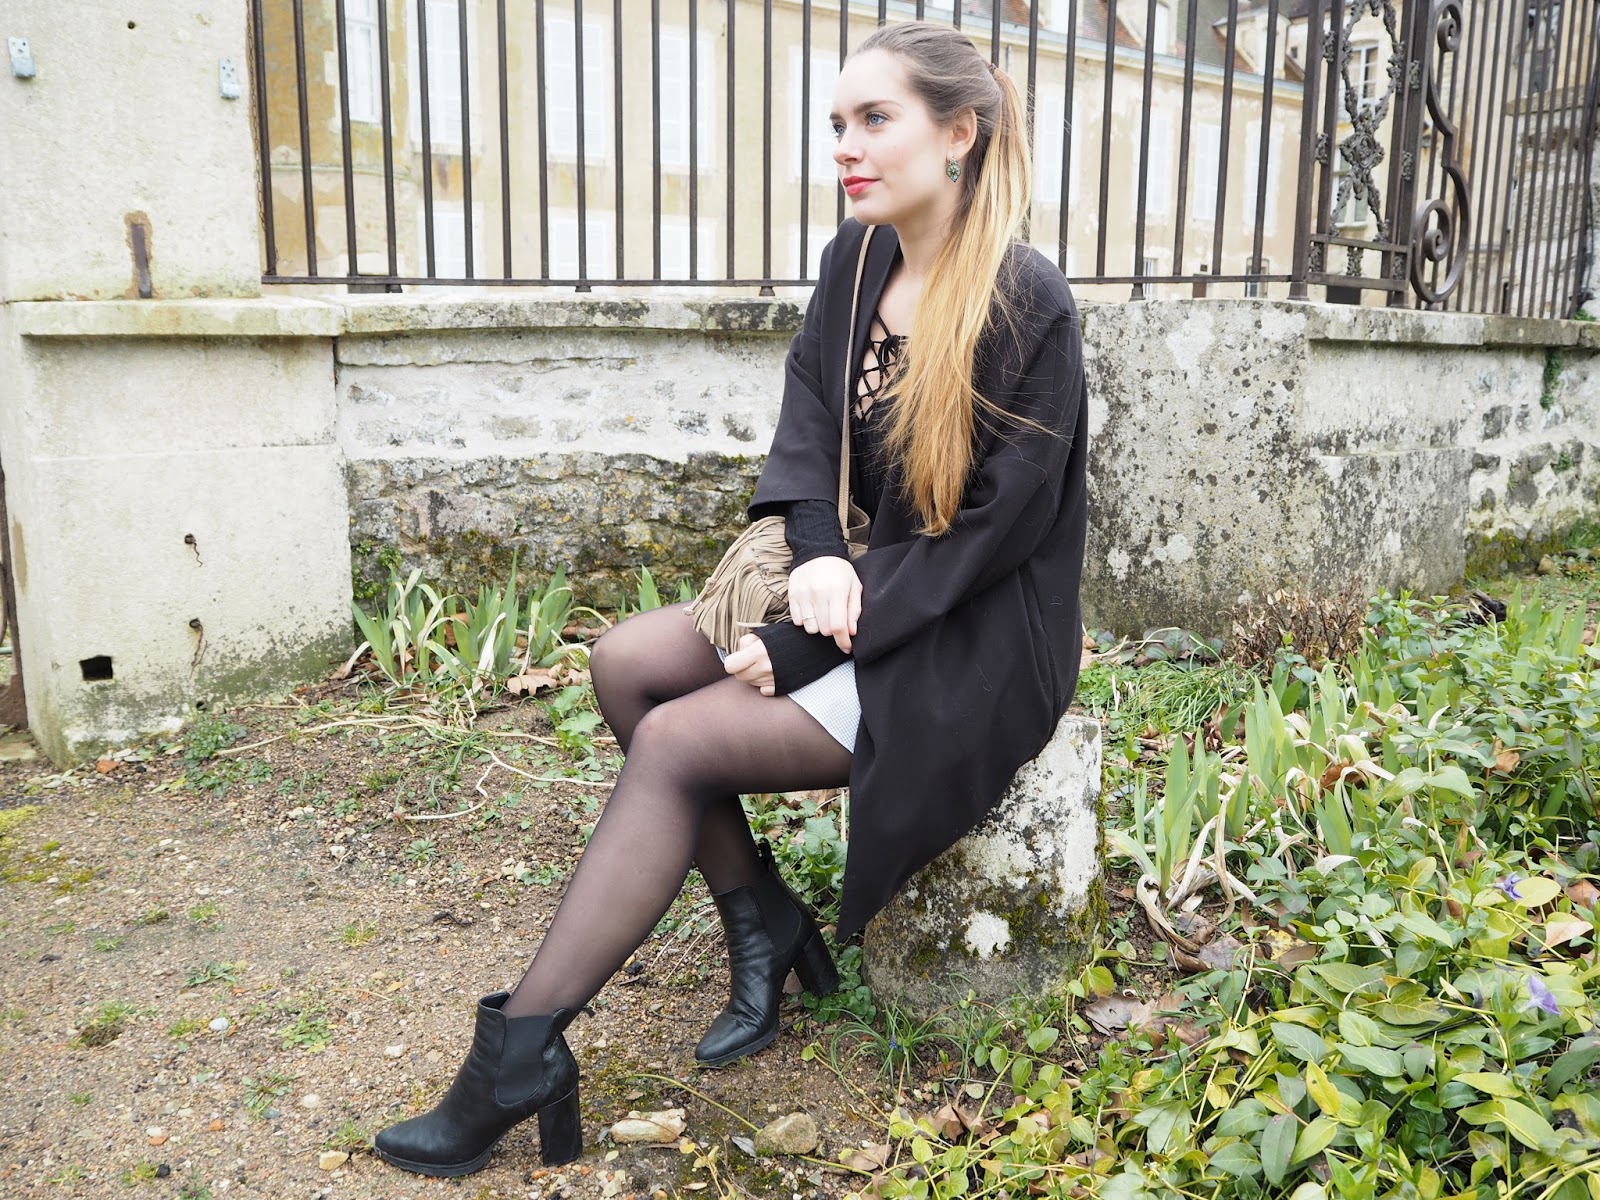 Street style www.graffitisdiaries.com - Fashionmylegs : The tights and ...